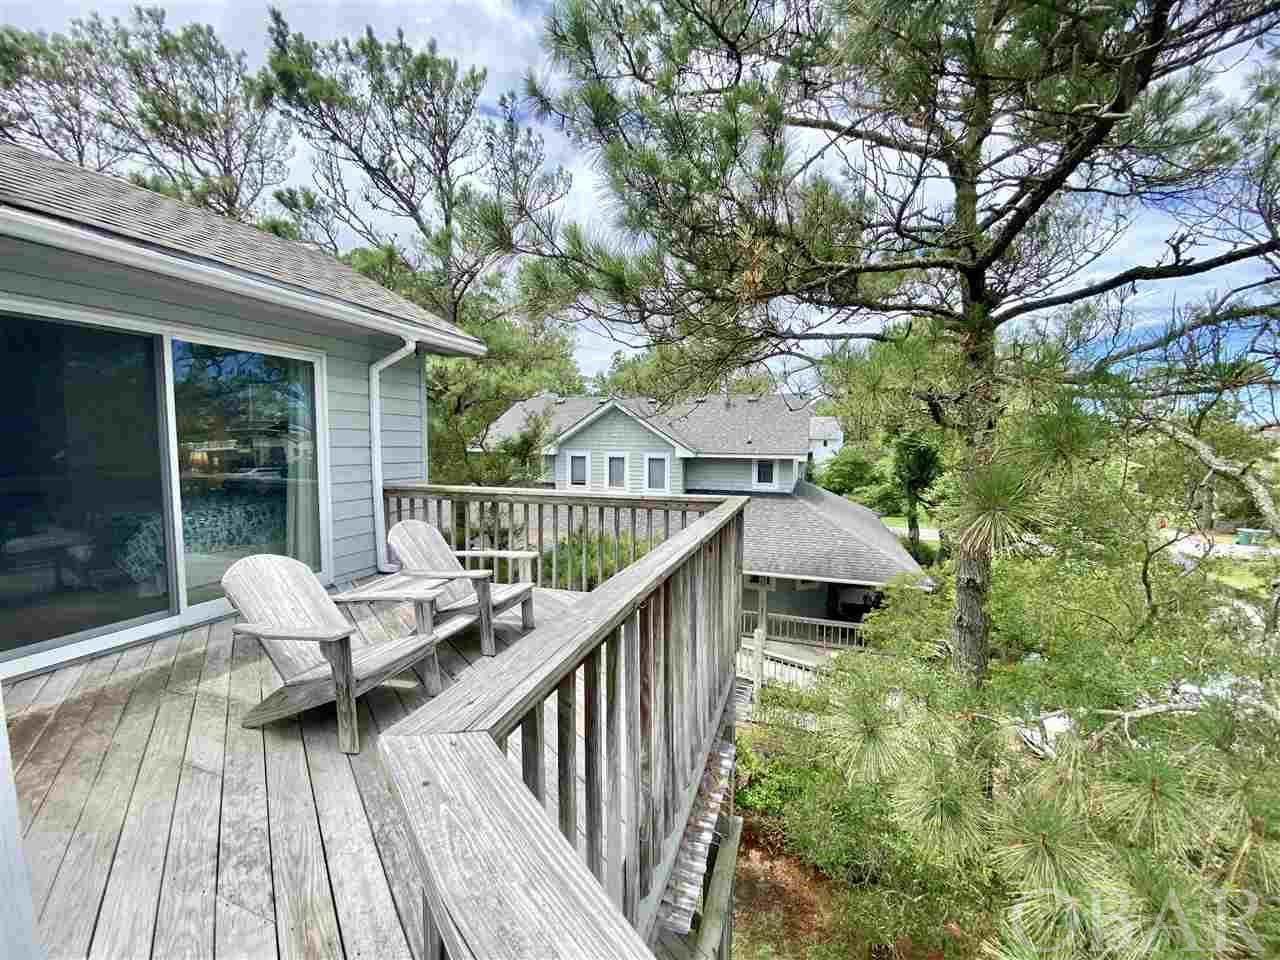 Corolla, North Carolina 27927, 4 Bedrooms Bedrooms, ,3 BathroomsBathrooms,Single family - detached,For sale,Fearing Court,109855